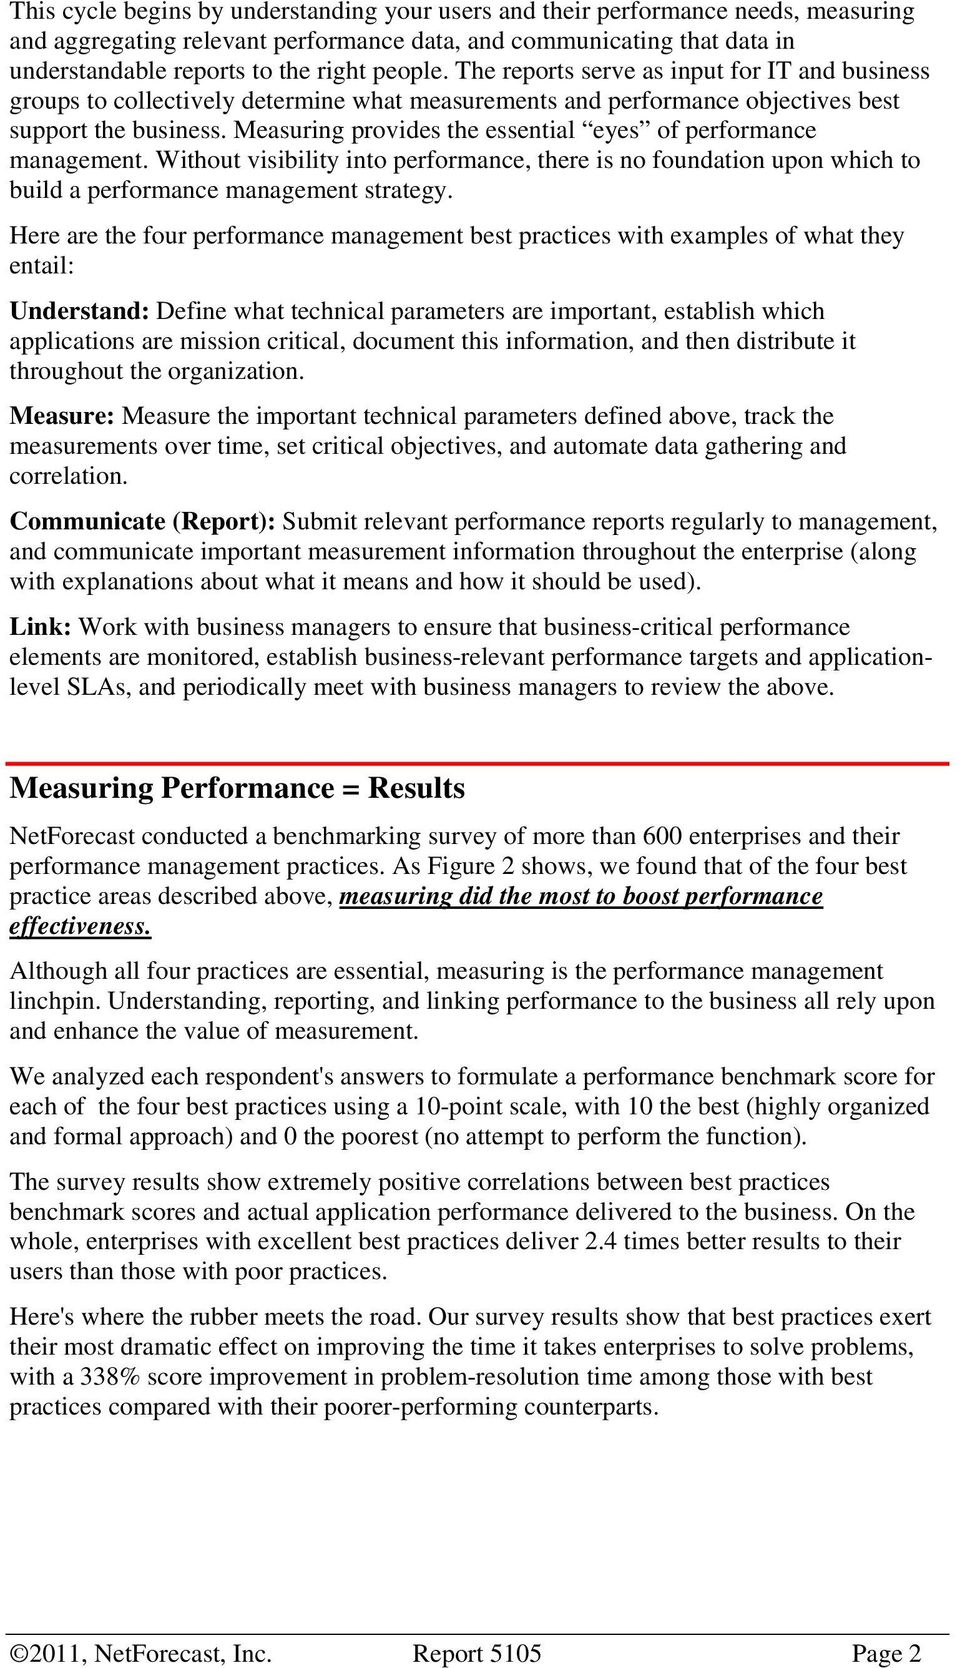 Measuring provides the essential eyes of performance management. Without visibility into performance, there is no foundation upon which to build a performance management strategy.